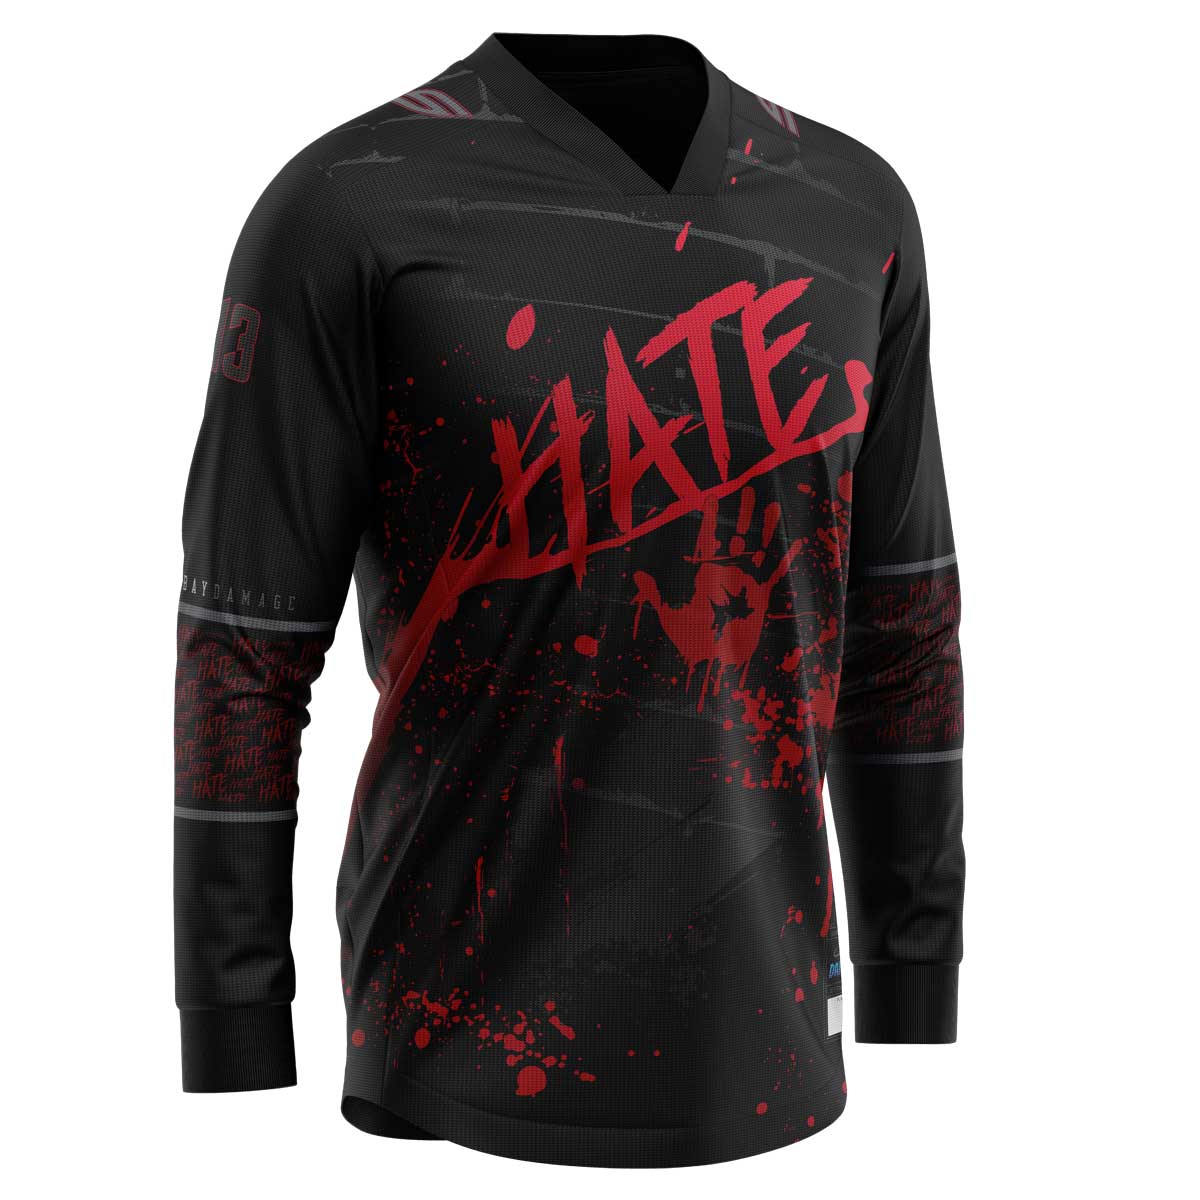 Tampa Bay Damage SMPL Jersey, LE Signature Series Jason Edwards - Hate - Social  Paintball